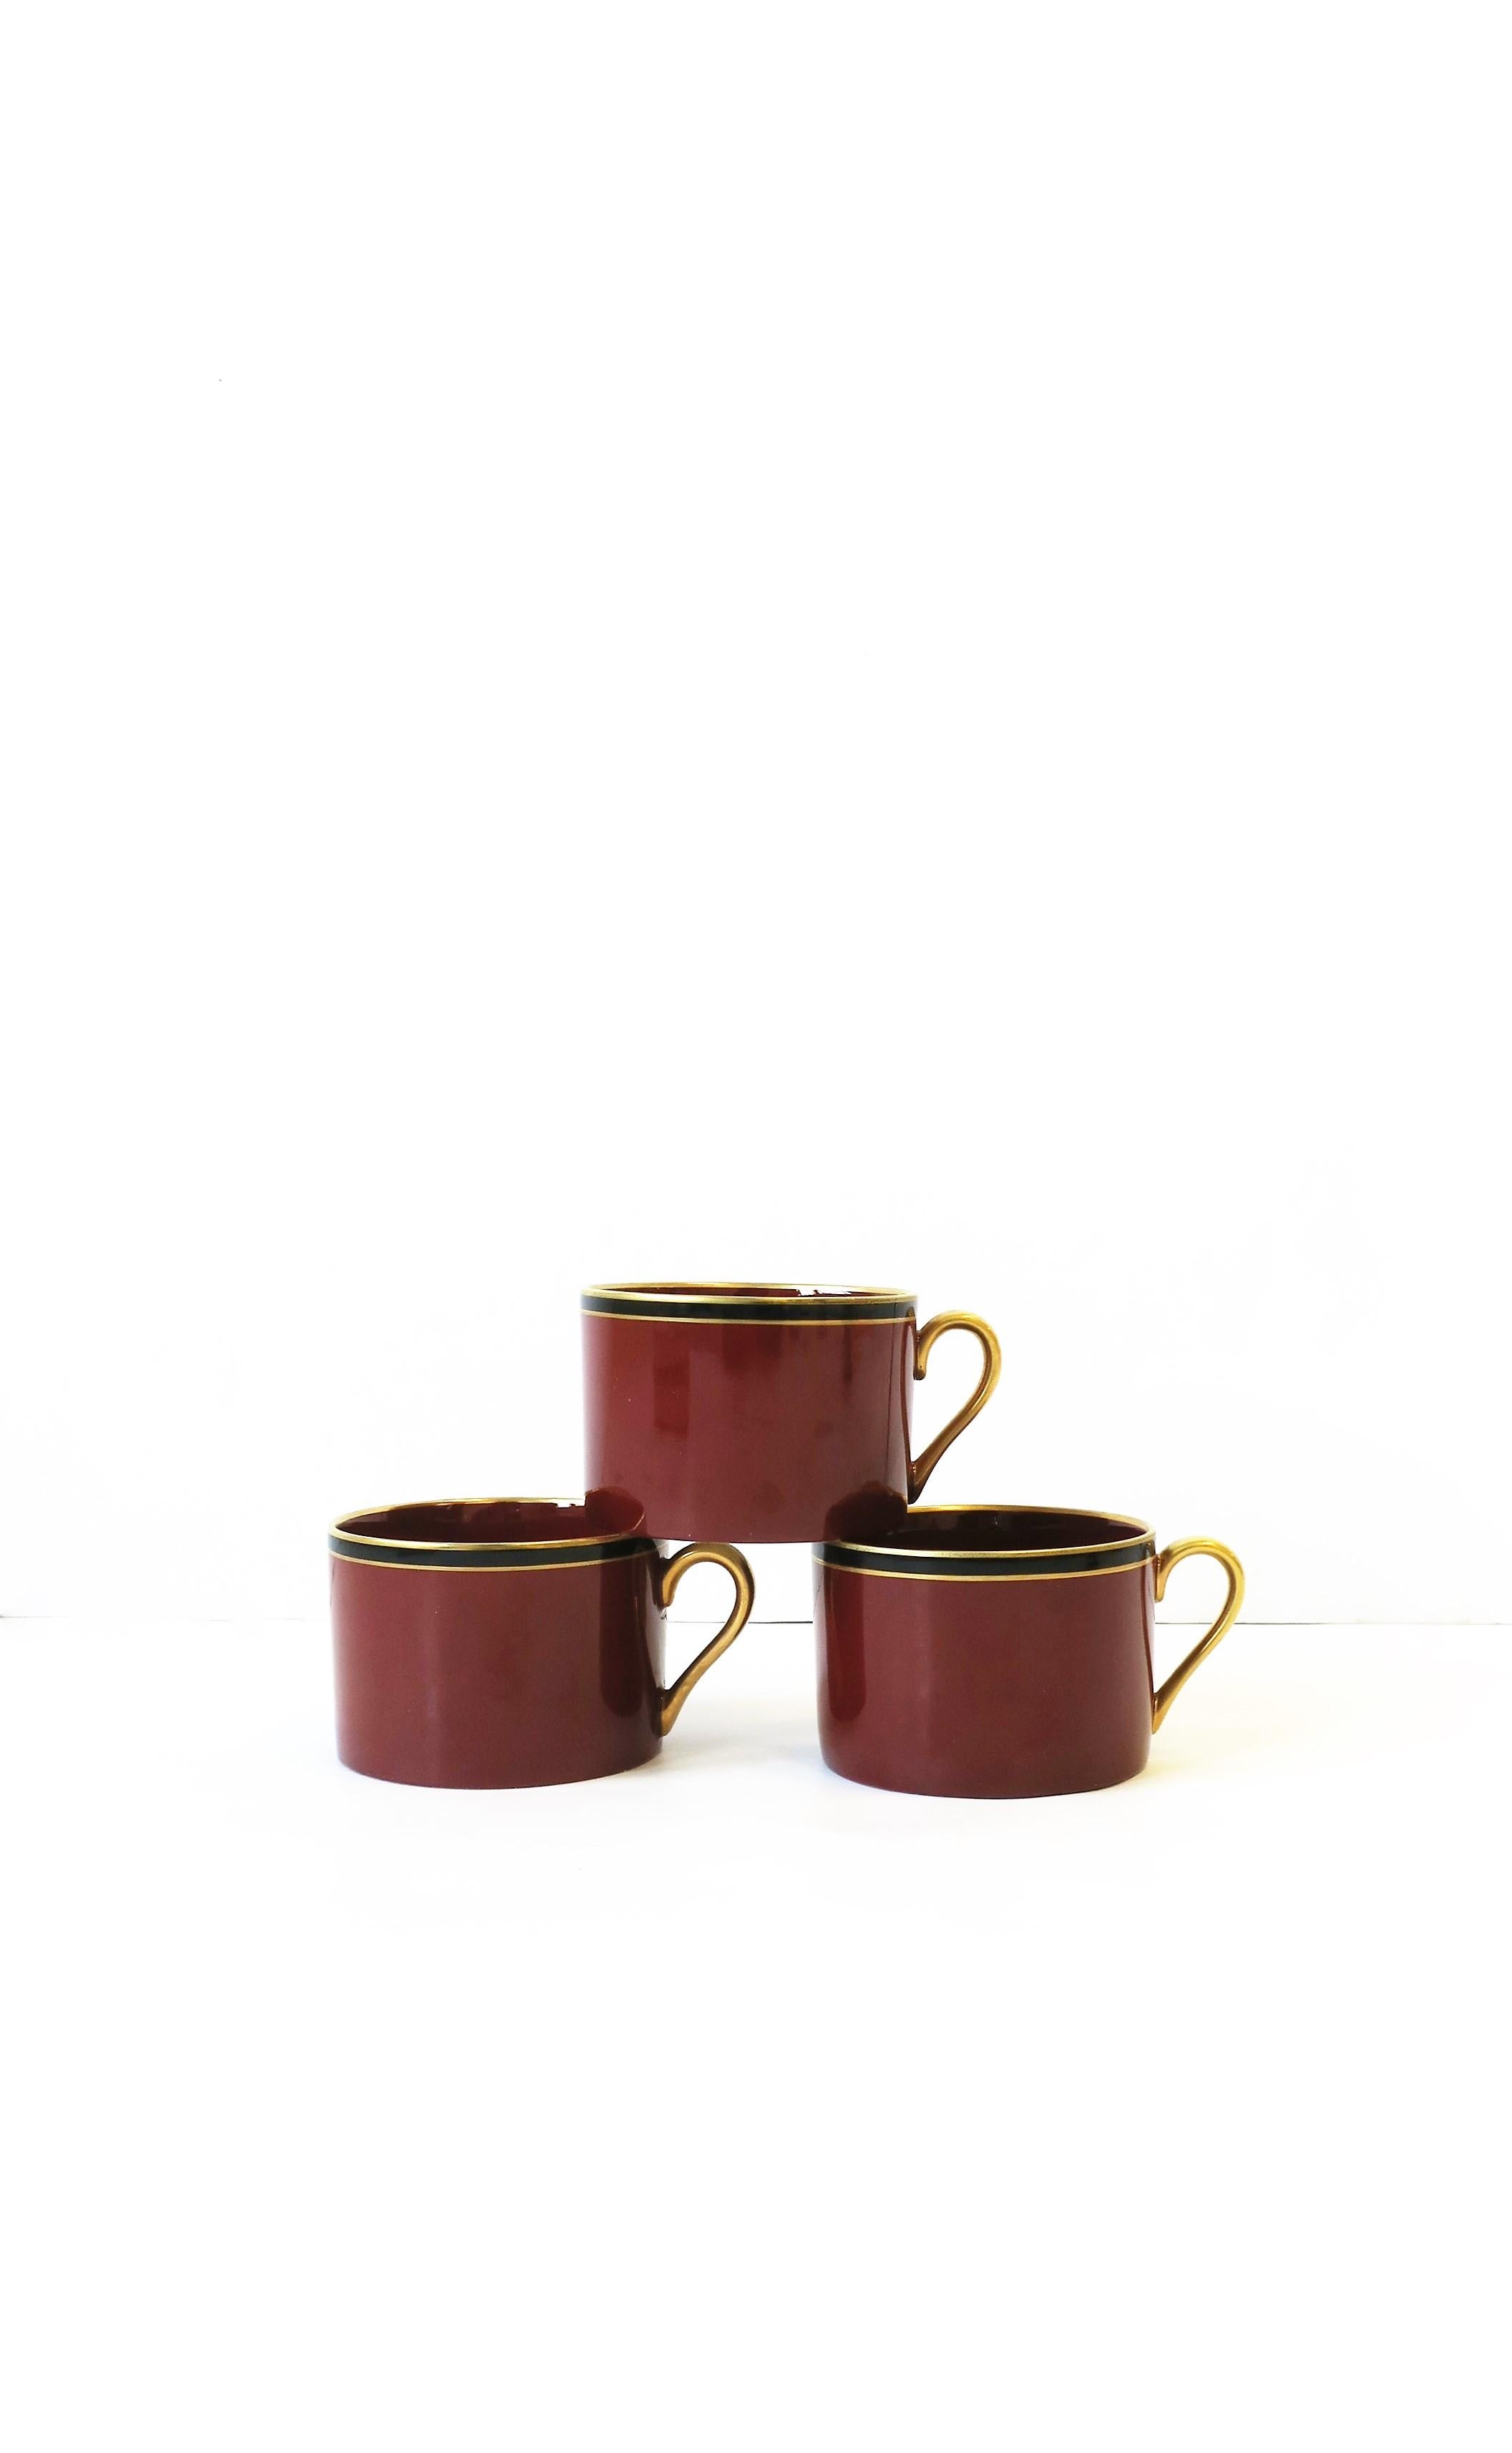 A chic set of three (3) vintage red burgundy, gold, and black porcelain coffee or tea cups, Mid-20th century, 1967. 

Side tables shown in image search 1stDibs ref. #s: LU1314221845702, LU1314221786072 (SOLD.)
Black Italian leather chair(s) shown,